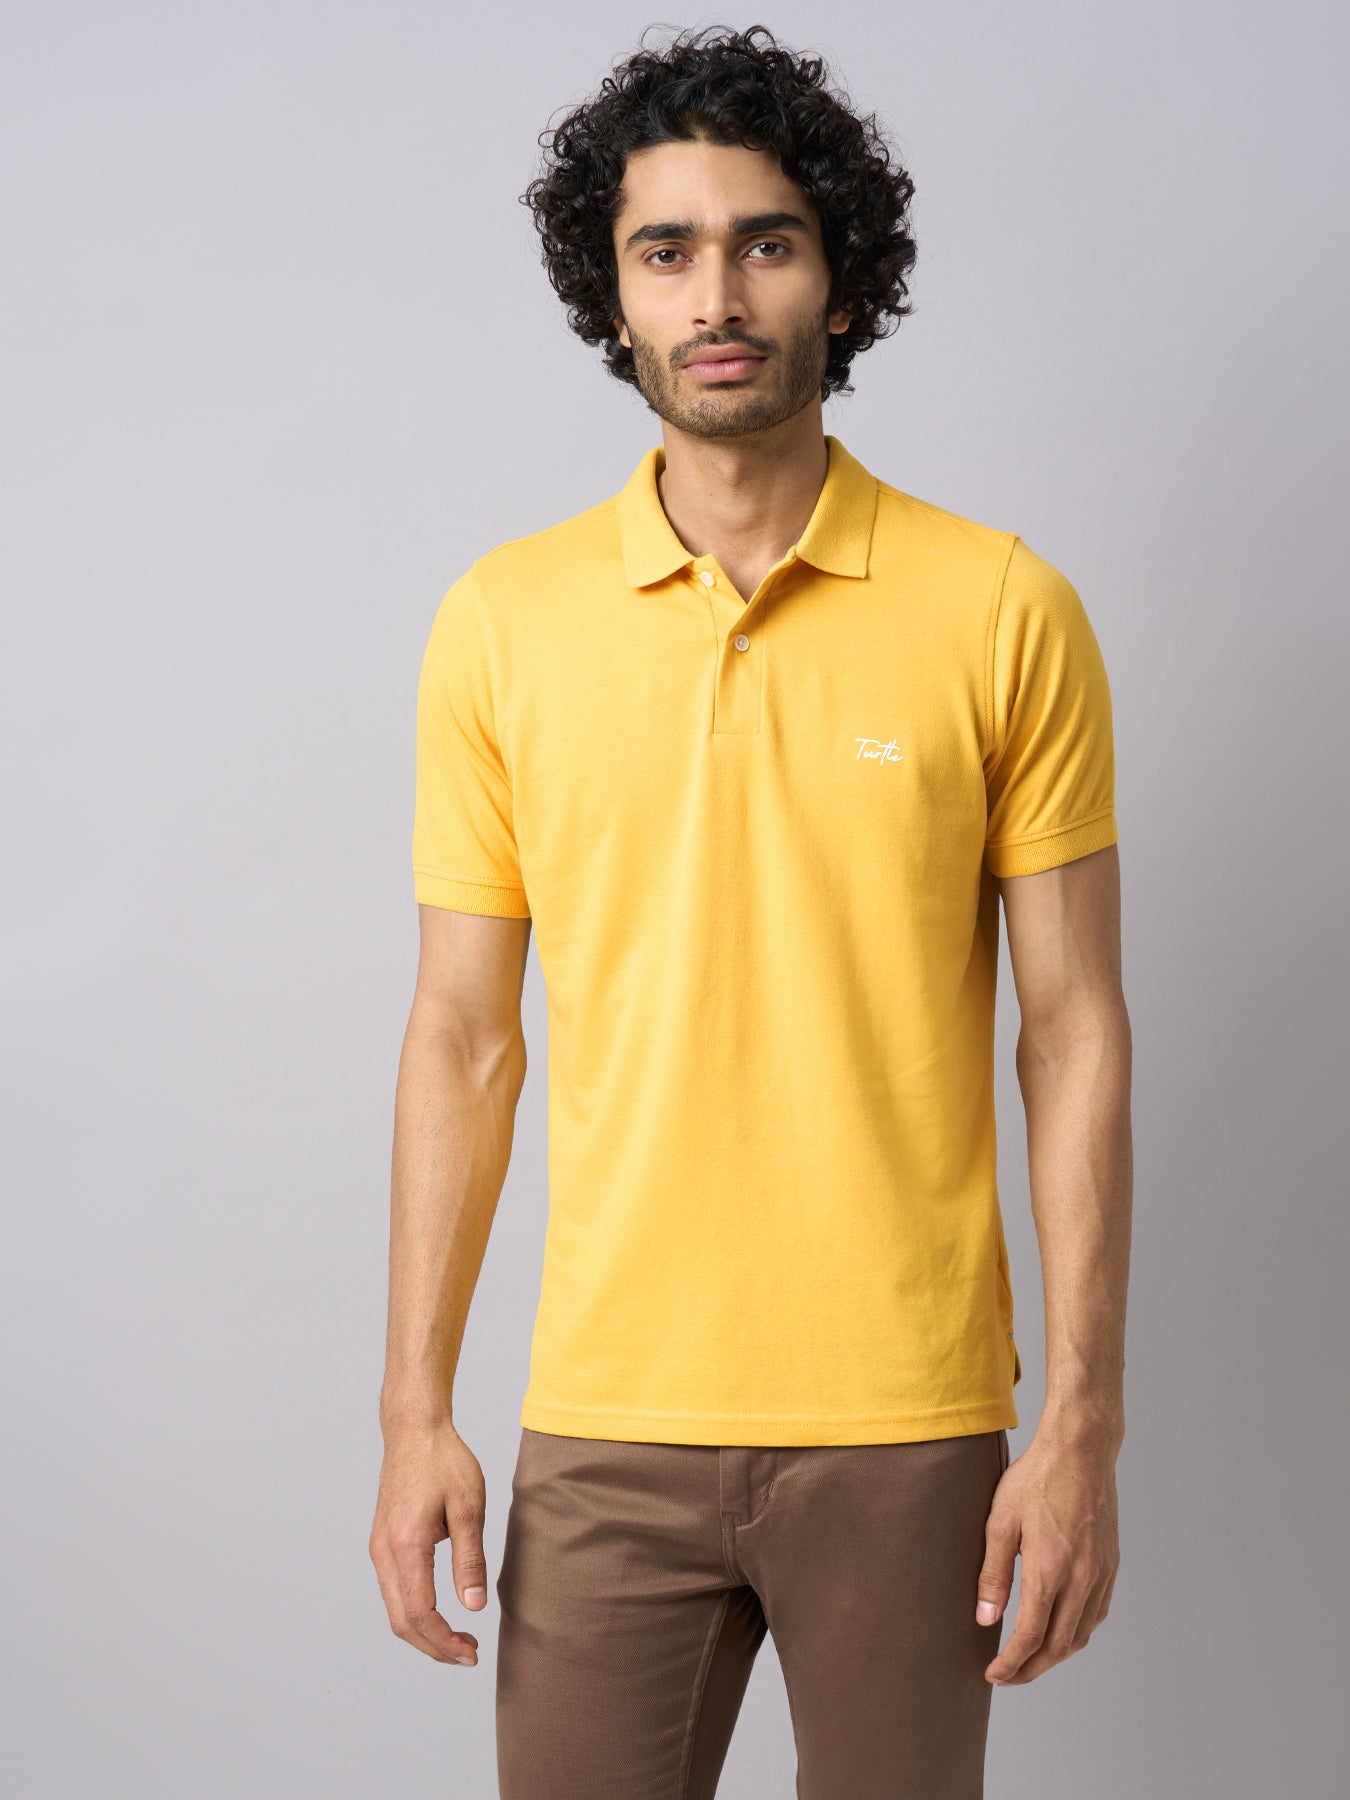 Cotton Stretch Yellow Plain Polo Neck Half Sleeve Casual T-Shirt